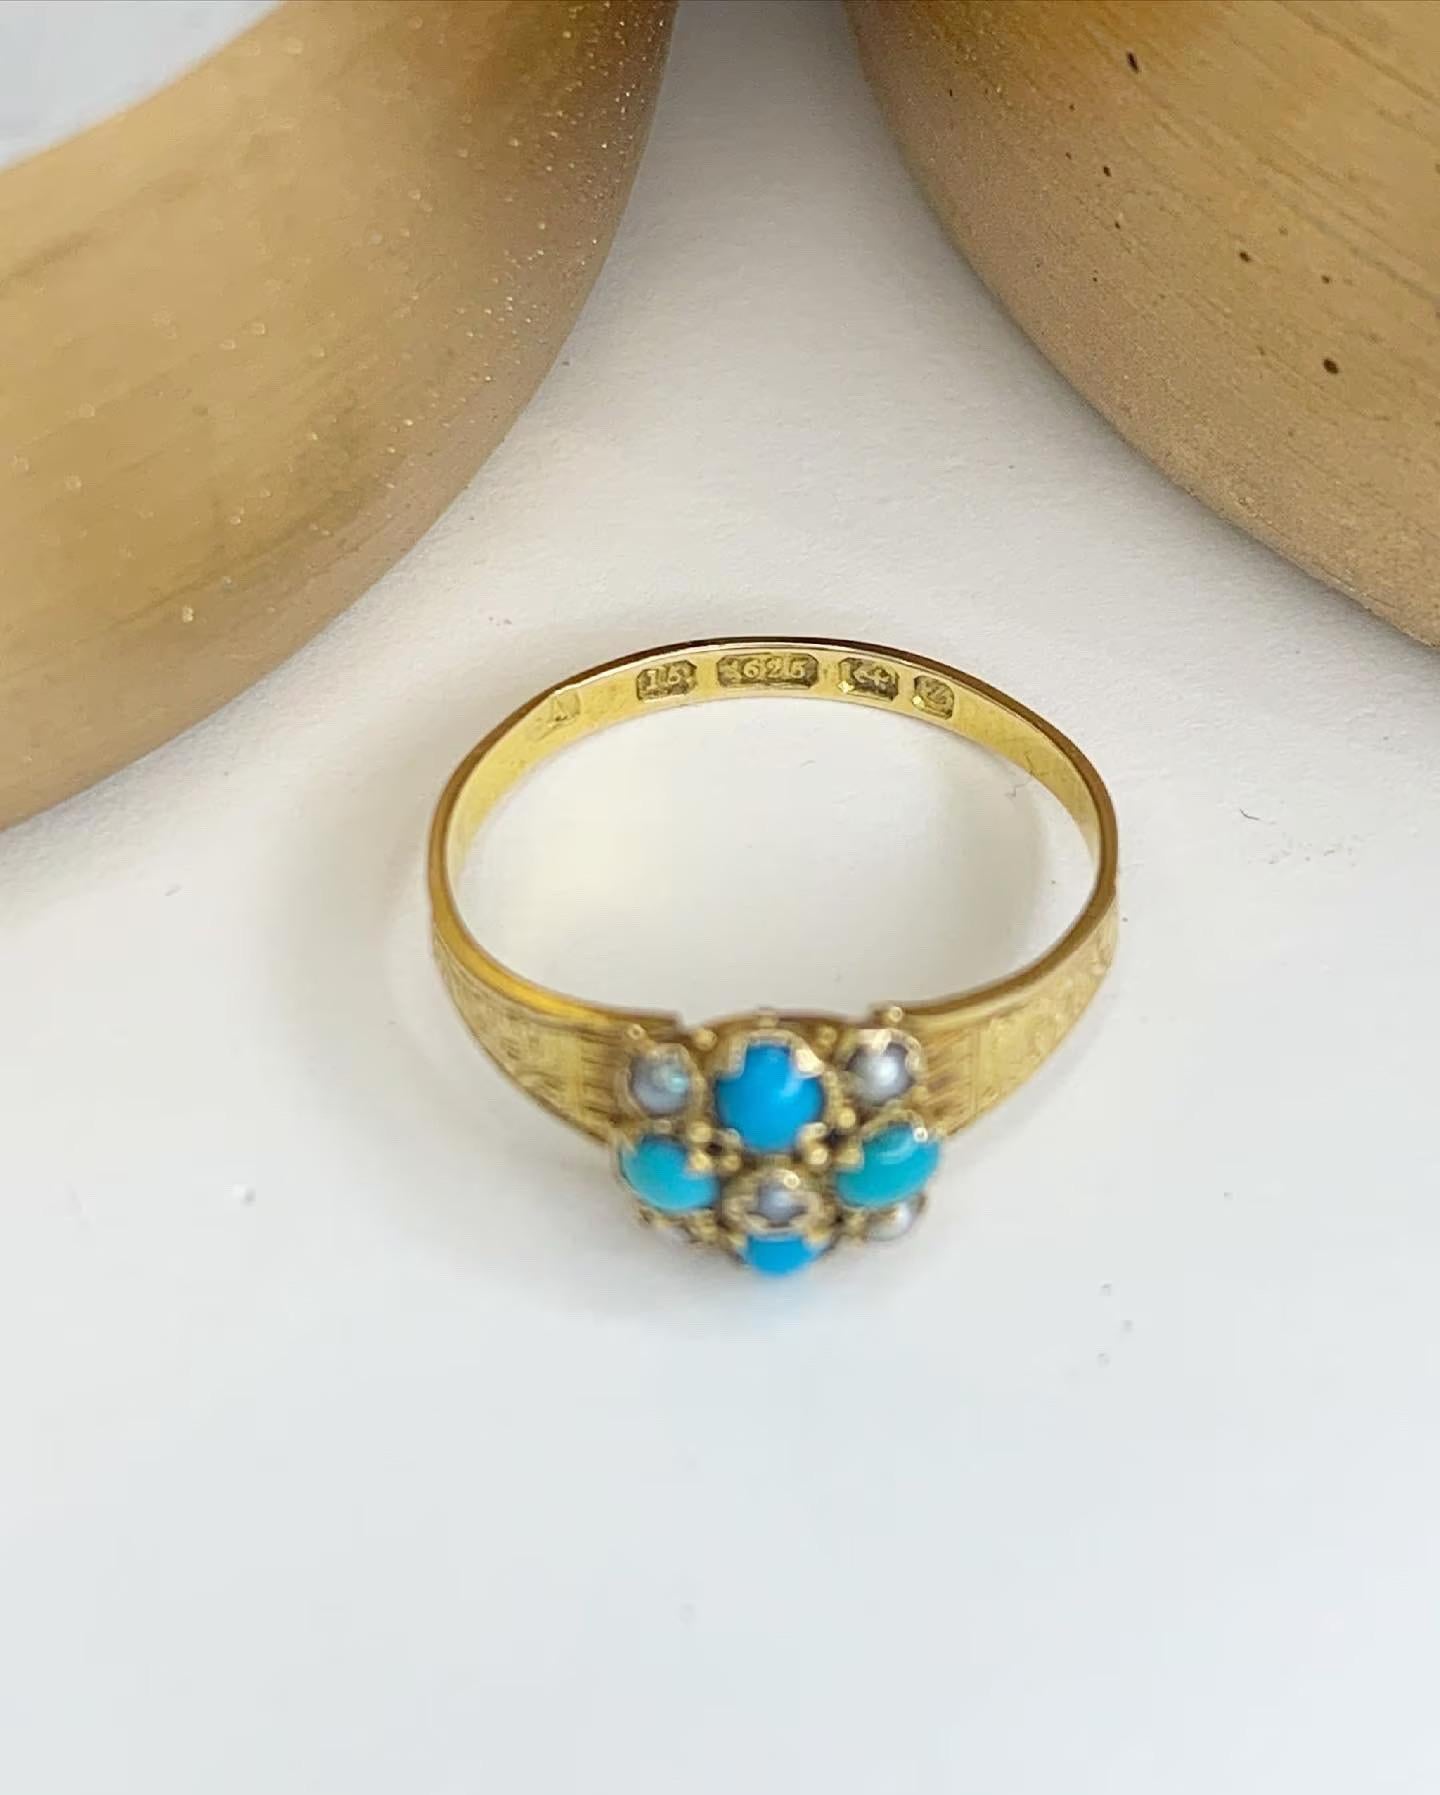 Turquoise & Pearl Ring 

15ct Gold 

Victorian- Hallmarked Birmingham 1899
Fabulous Hand Engraved Shoulders. 

UK Size K 

US Size 5 1/2

Can be resized using our resizing service,
please contact us for more information

All of our items are either